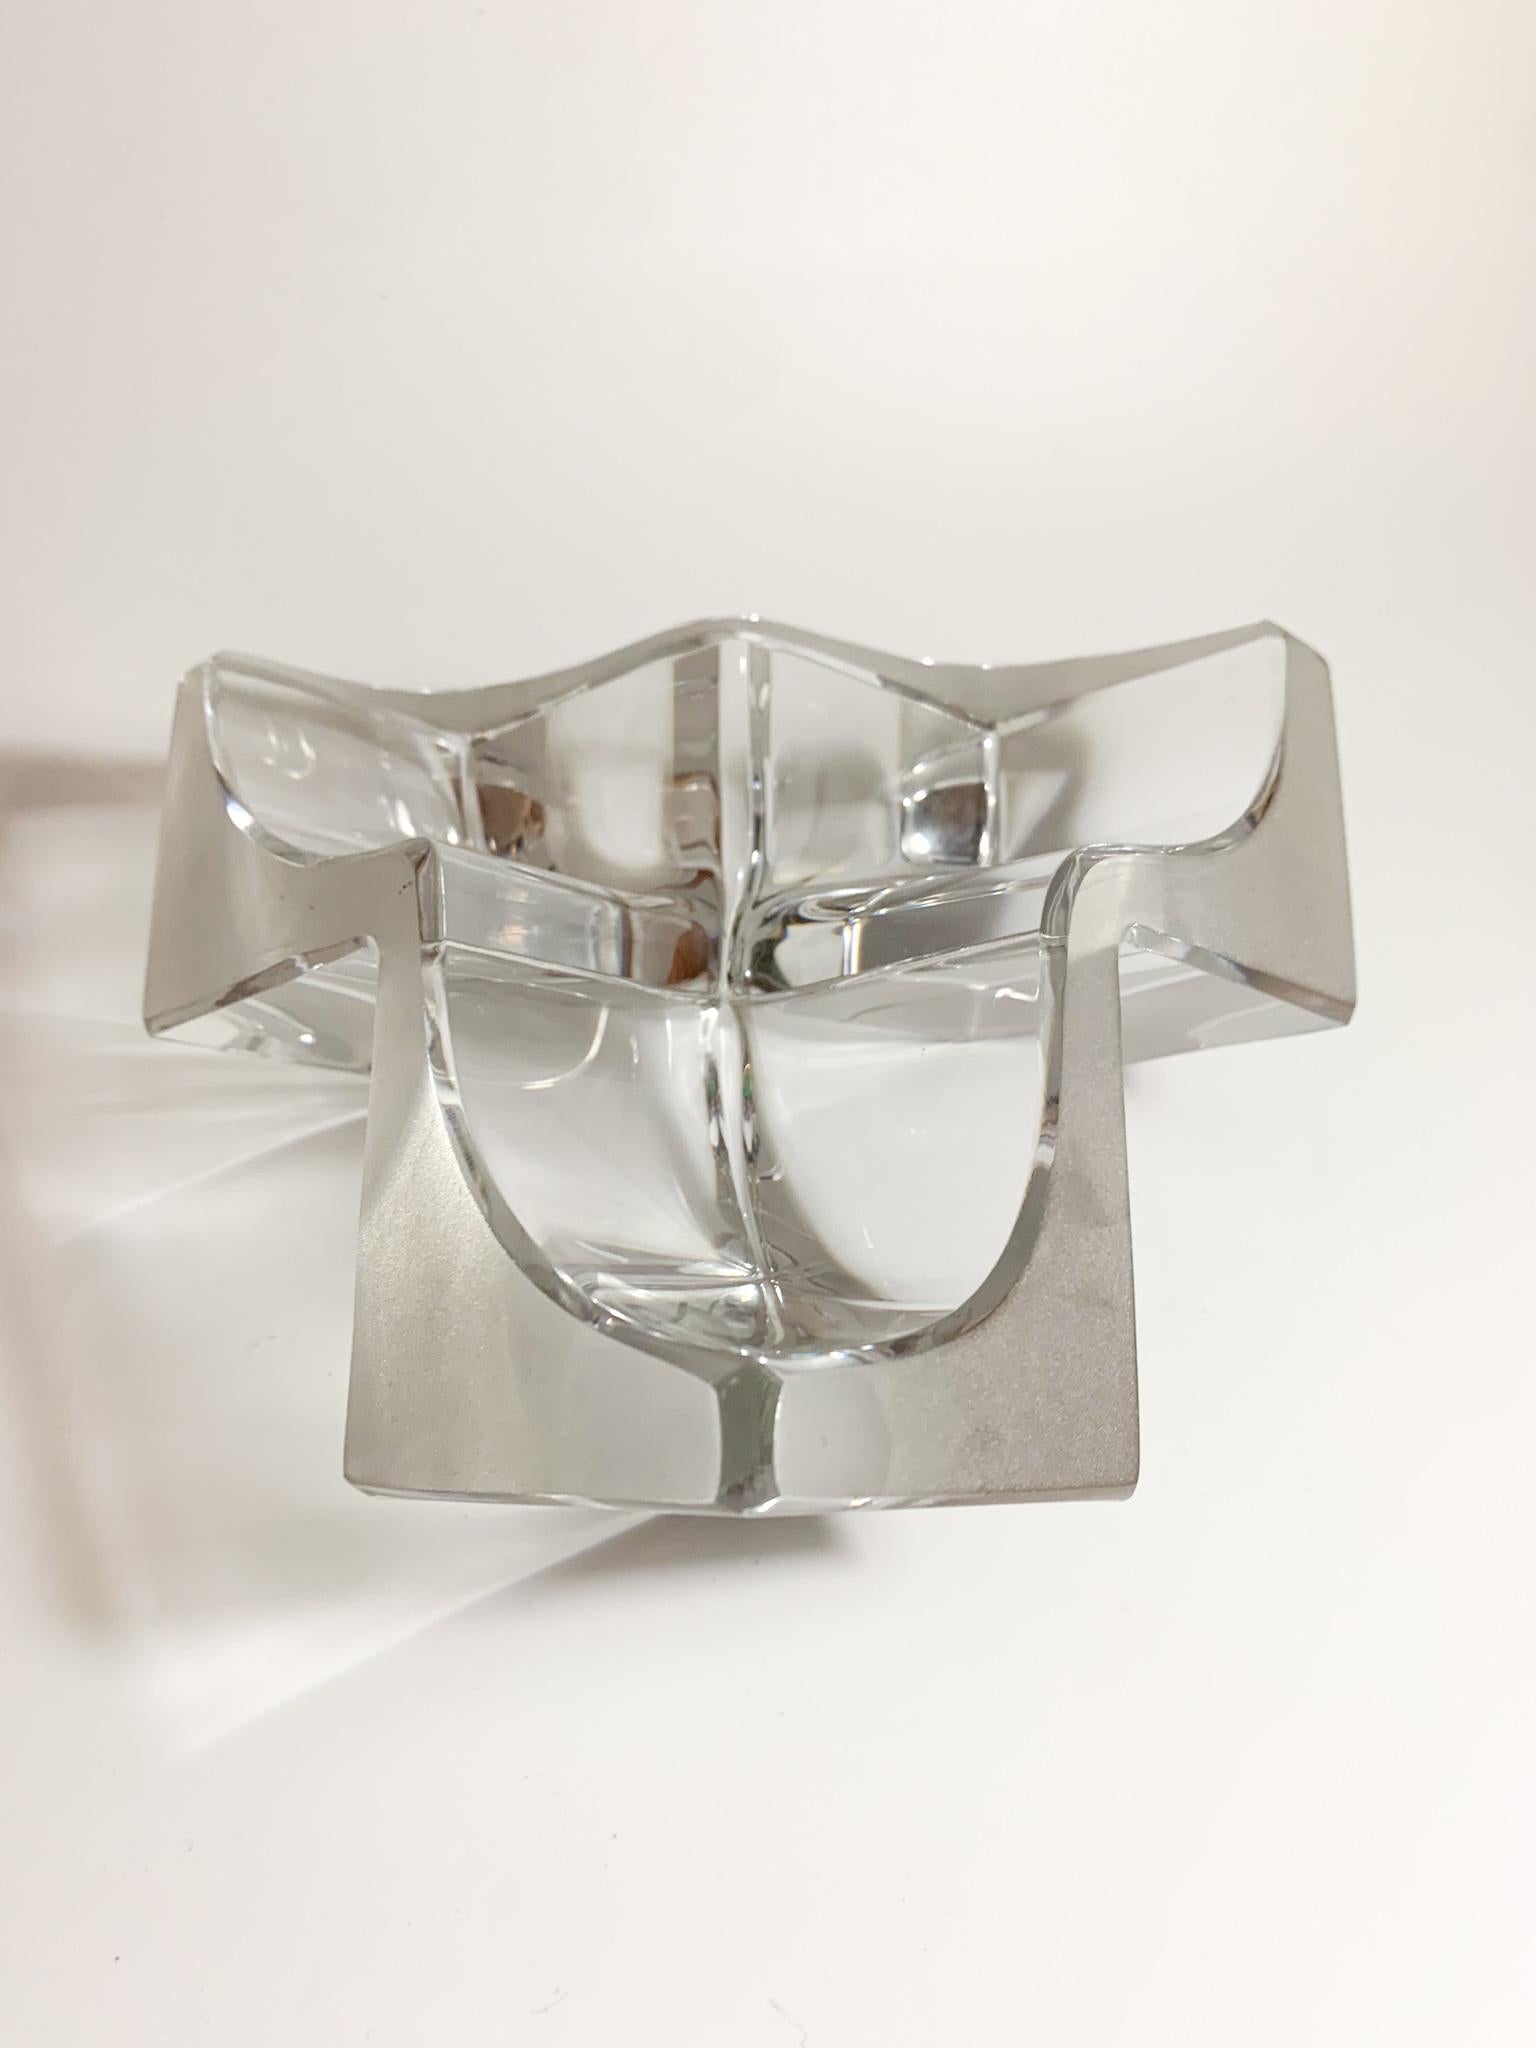 Geometric Abstract Sculpture in Transparent Crystal by Daum from the, 70s 1